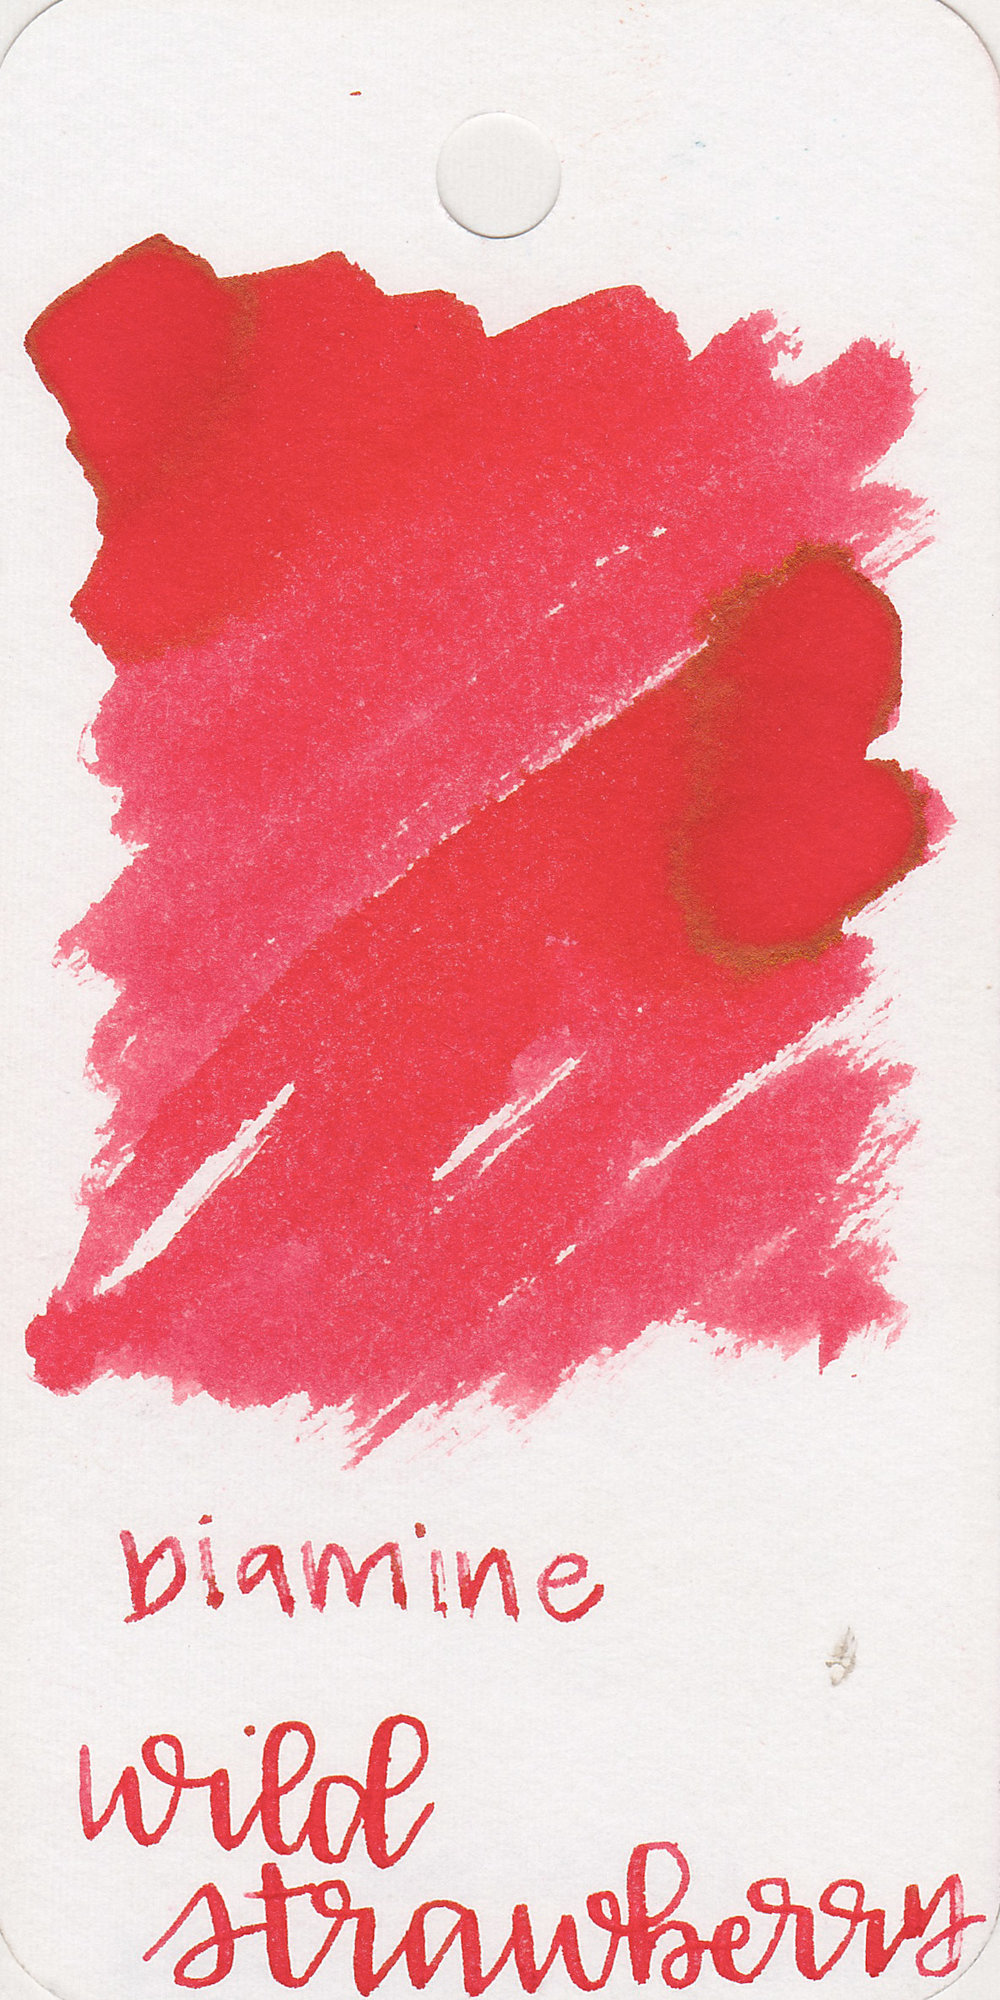 Review #546: Diamine Strawberry — Mountain of Ink